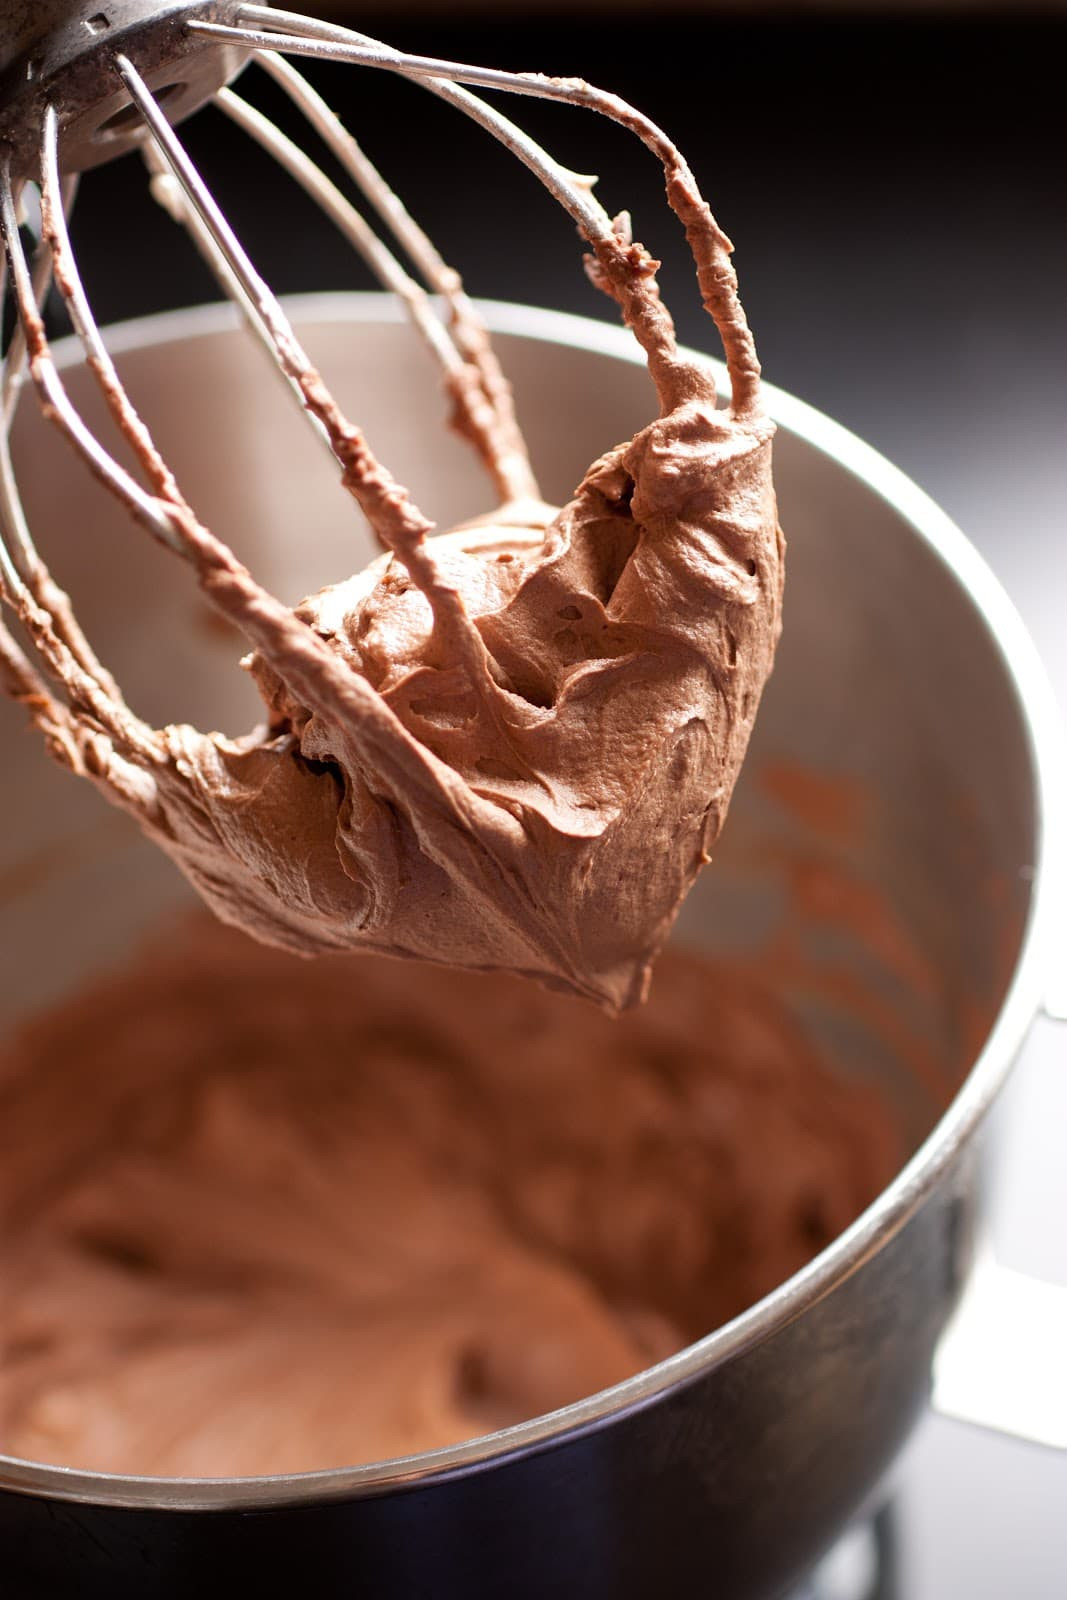 Chocolate Frosting Recipes Unique the Best Chocolate buttercream Frosting Recipe Cooking